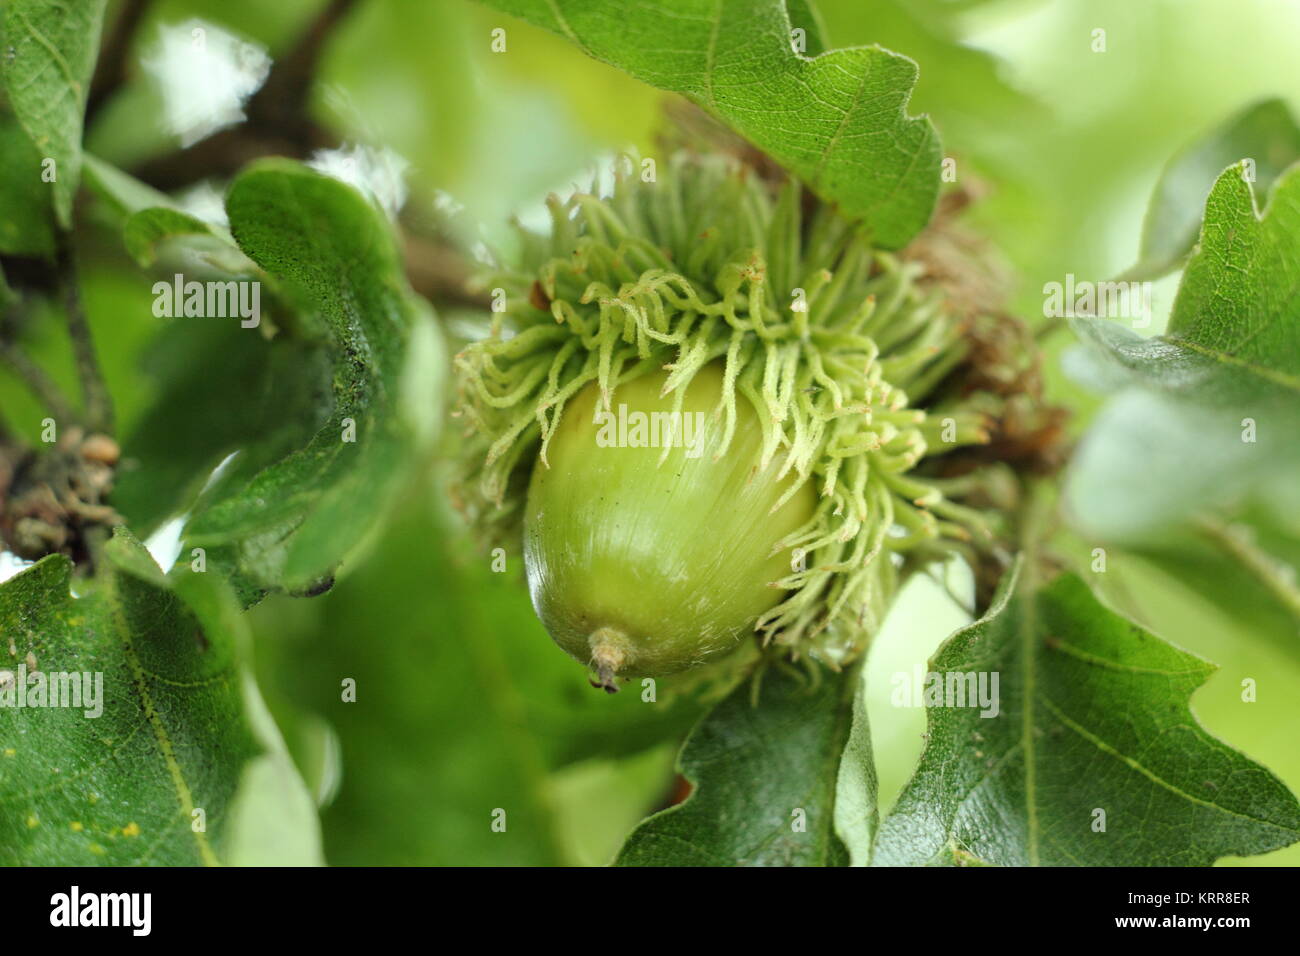 Turkey Oak tree (Quercus cerris), displaying foliage and developing fruit in summer (July), UK Stock Photo